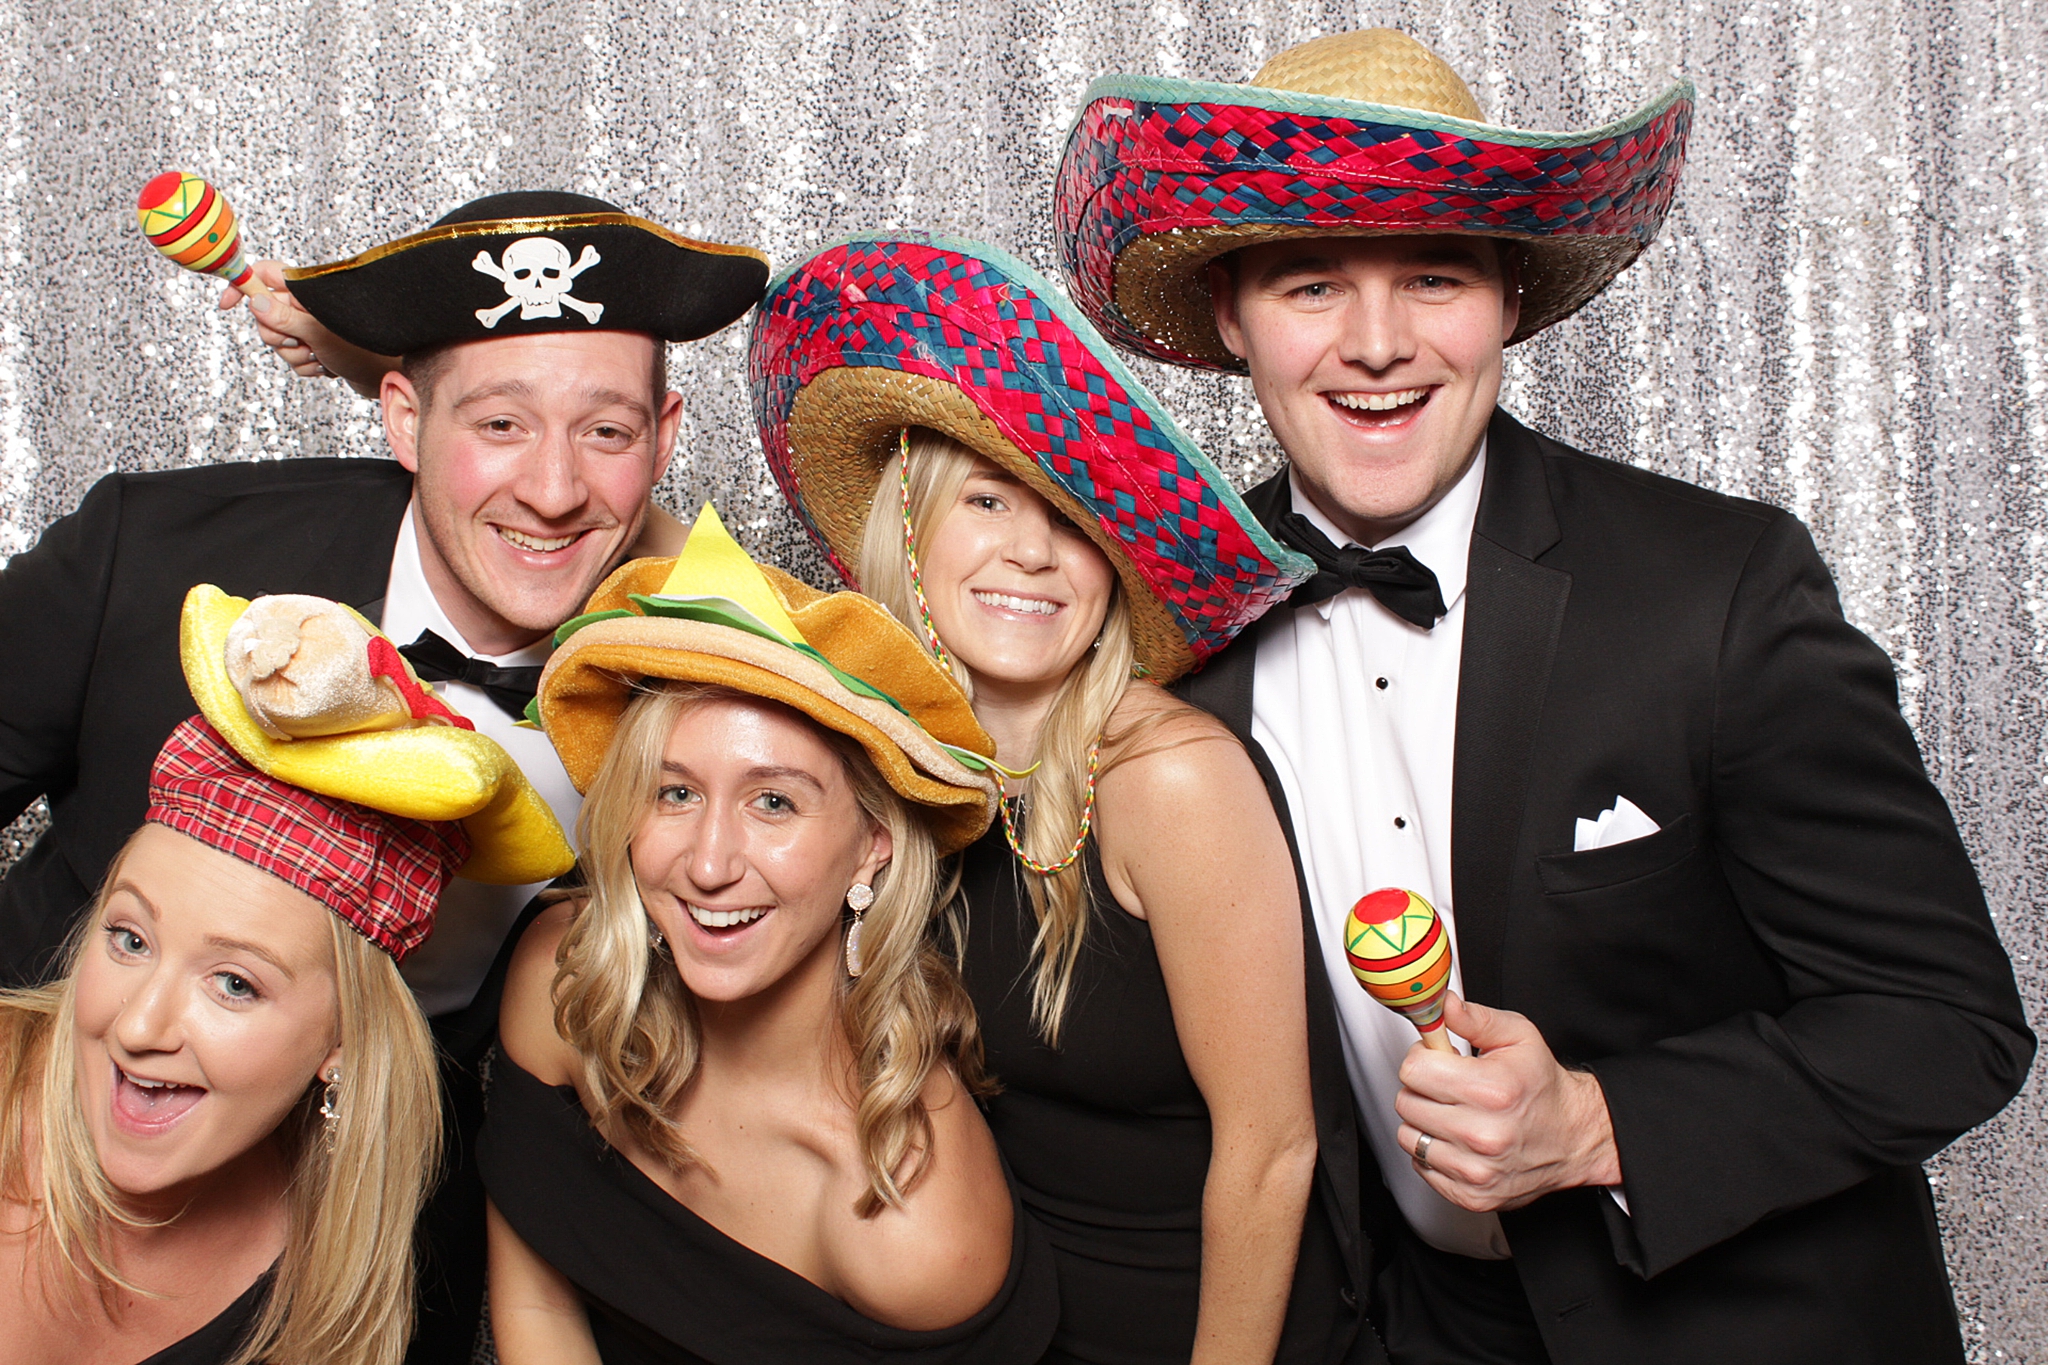 wedding guests in sombreros pose in photo booth